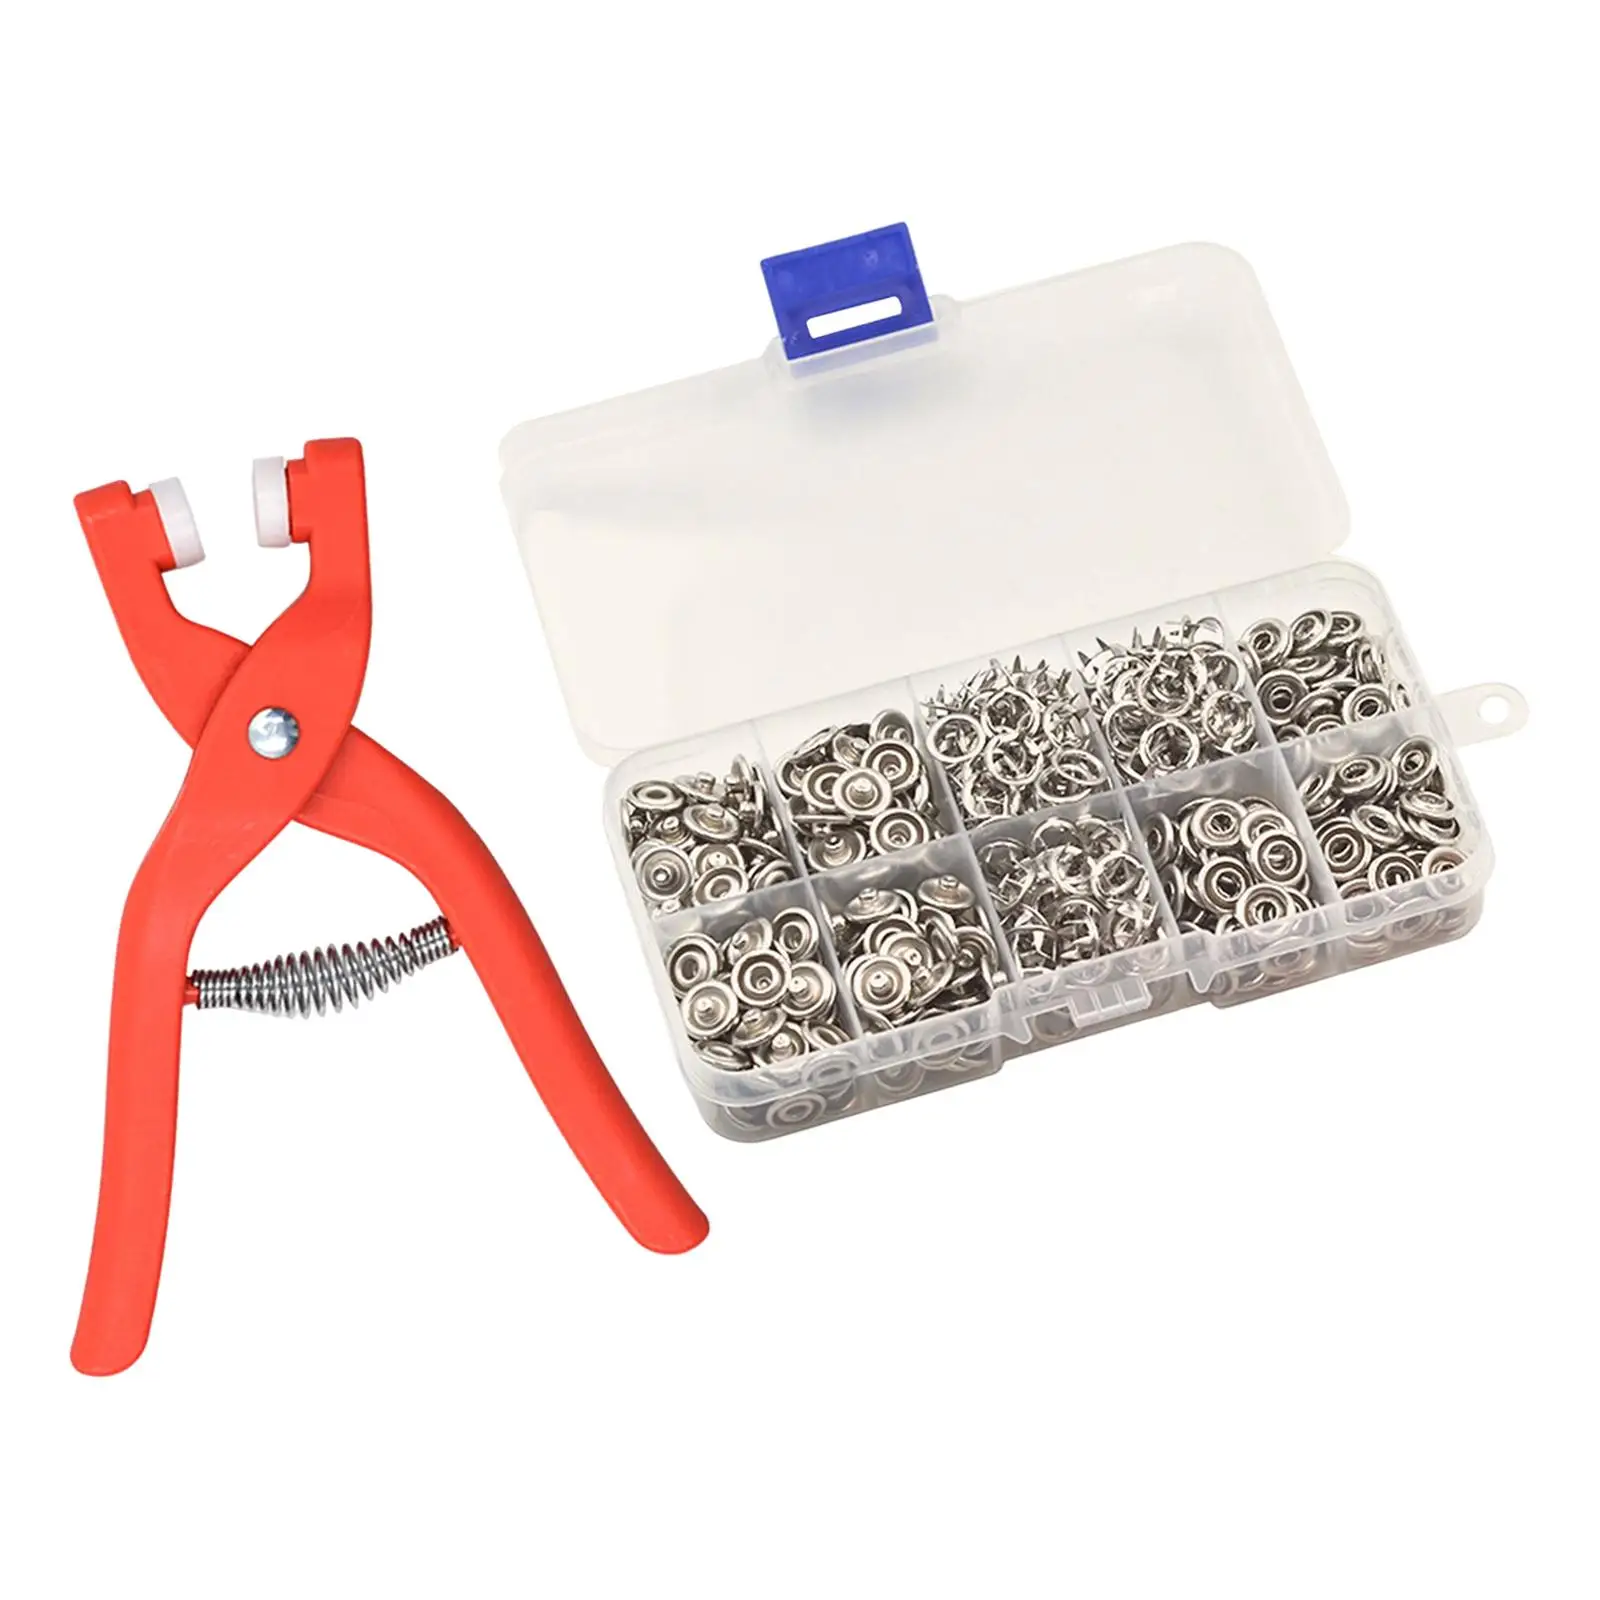 100 Hollow Snaps 100 Solid Snaps Snap Claw Set with Hand Pressure Plier Prong Ring Button Kit for Shirt Jeans Baby Clothing Bags